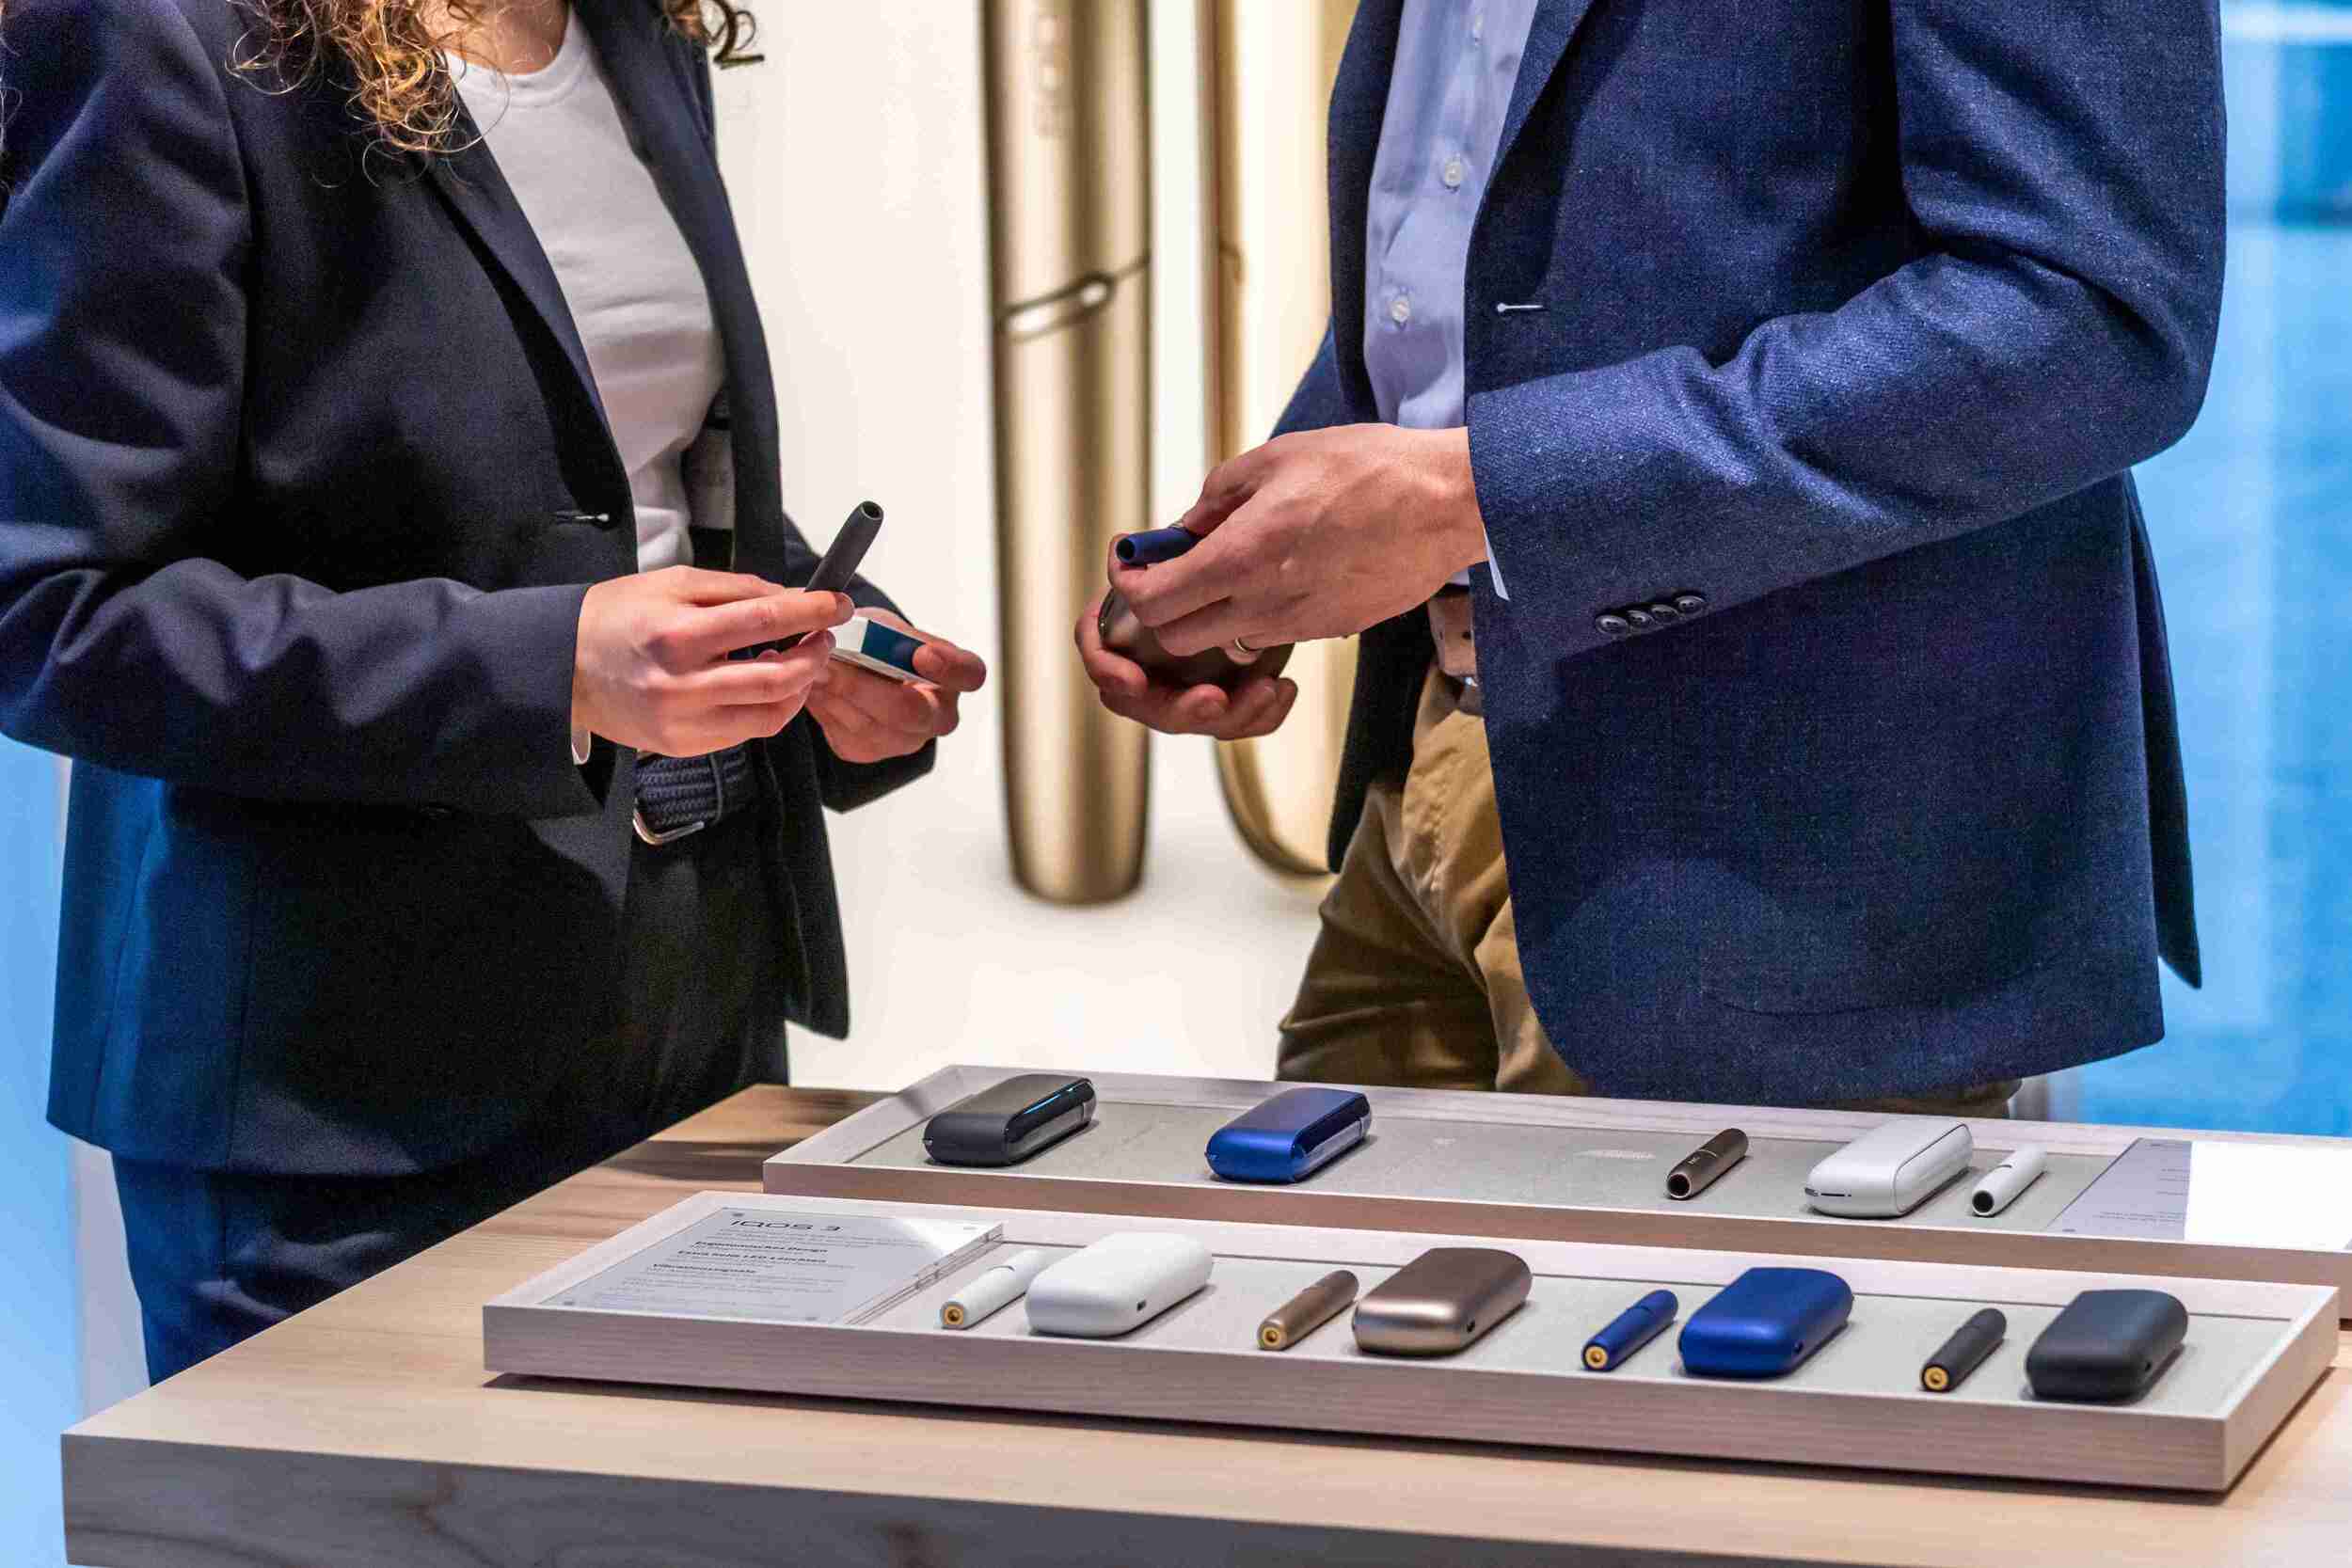 IQOS 3 products on display in an IQOS boutique.